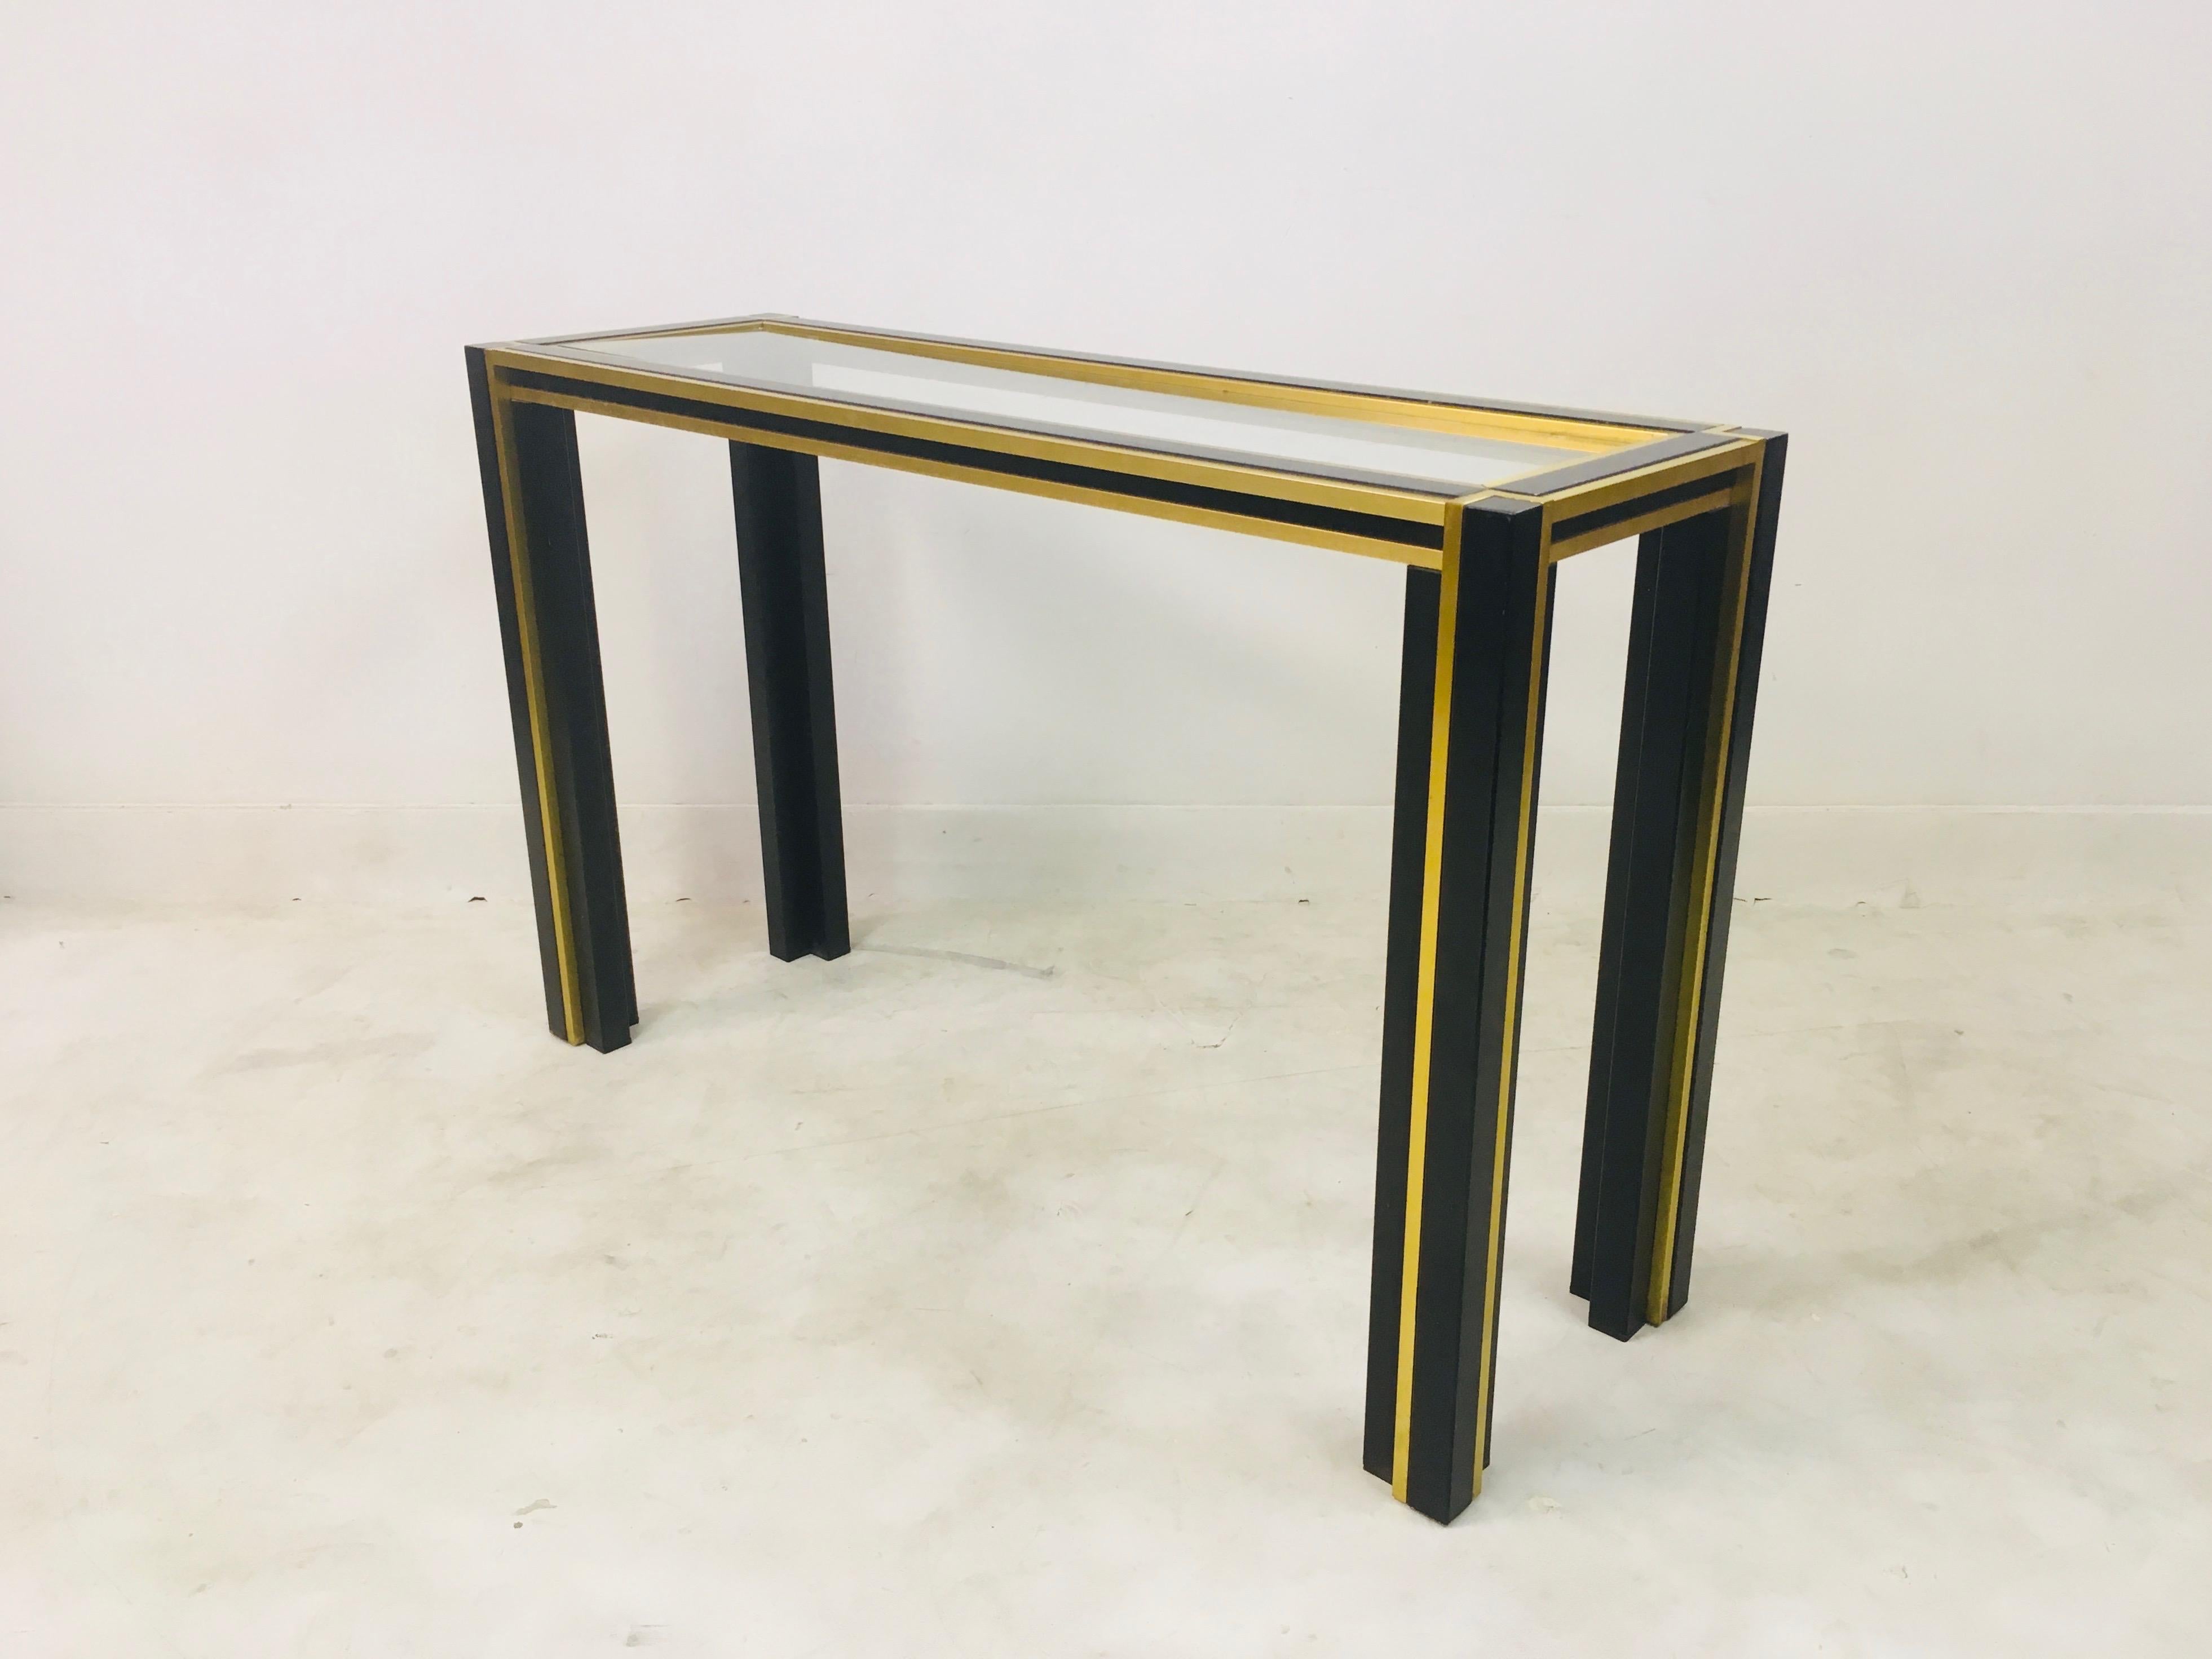 Vintage 1970s Italian Brass and Black Metal Console Table and Mirror For Sale 1